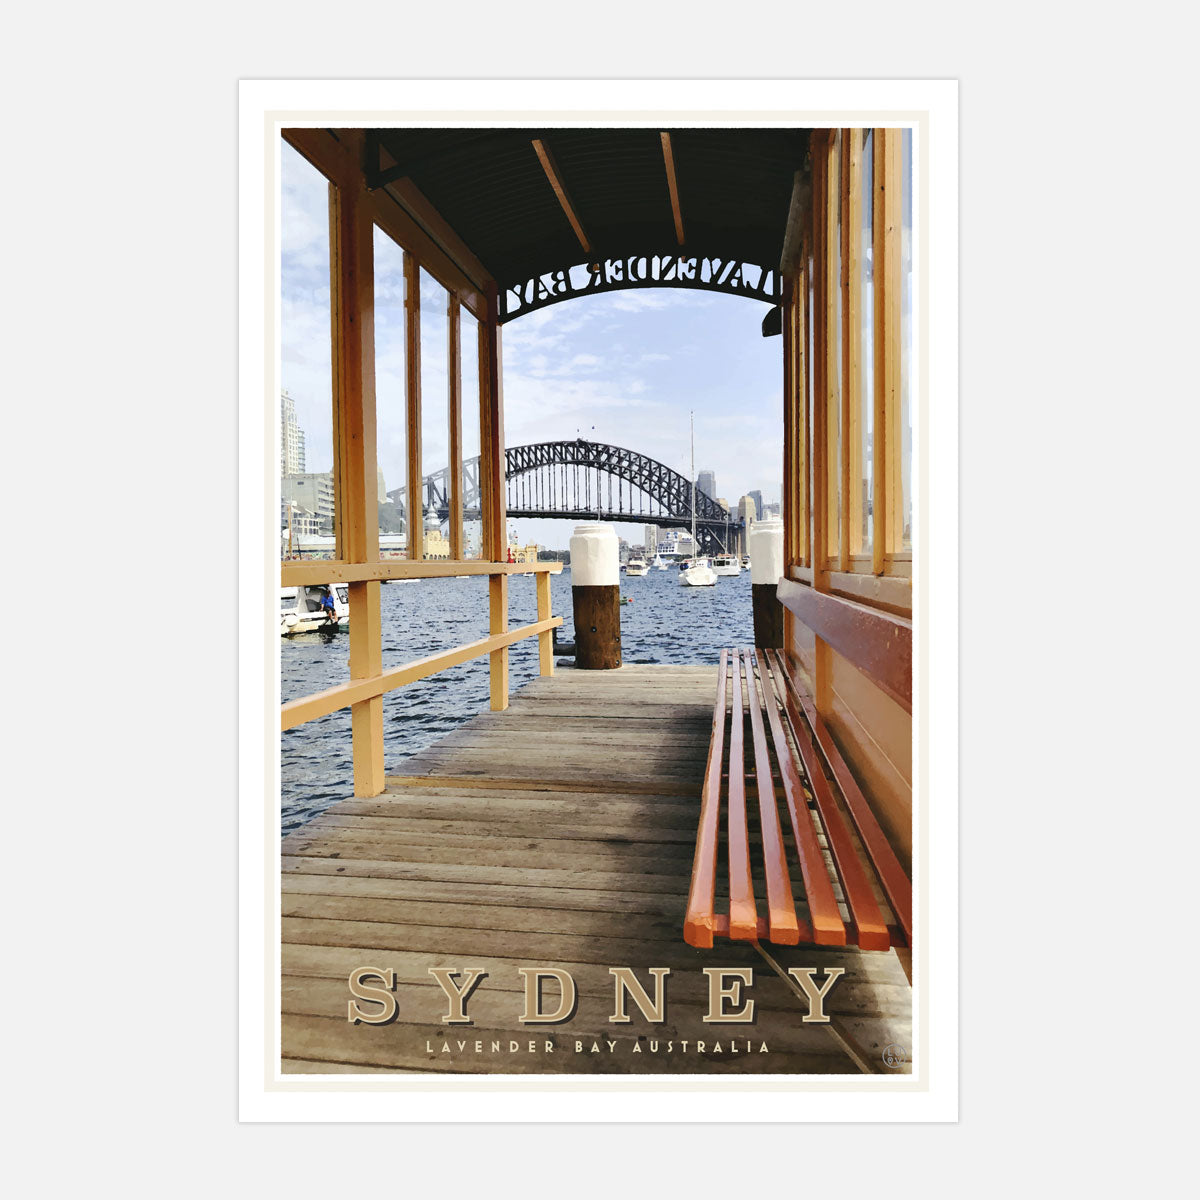 Sydney Lavender Bay vintage style travel poster by places we luv